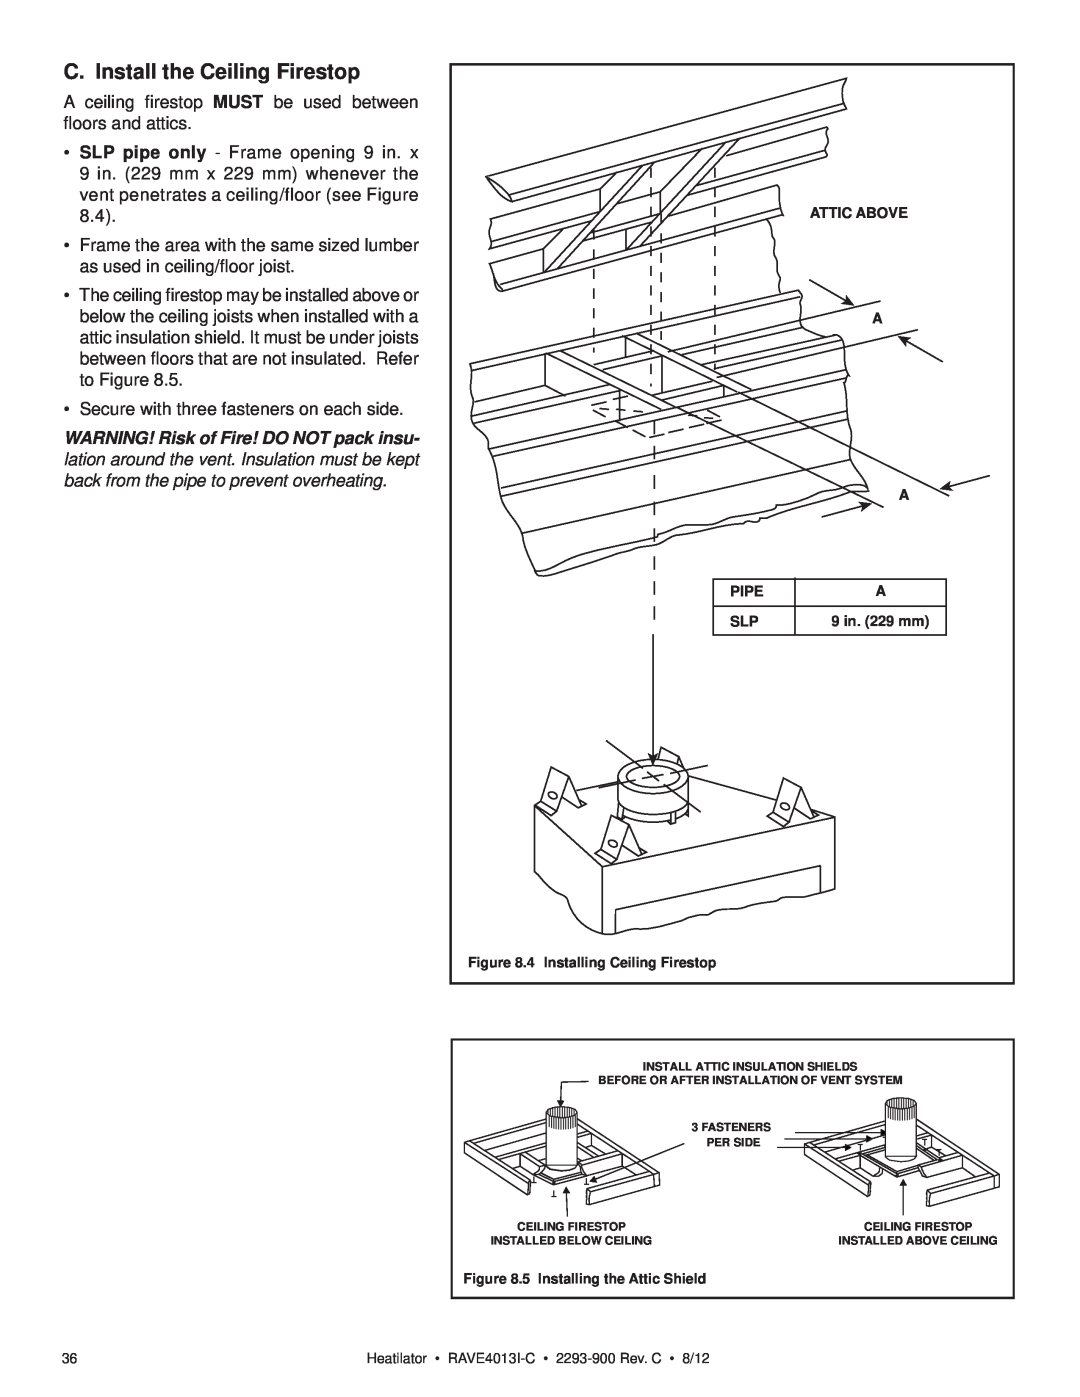 Heatiator Rave4013i-c owner manual C. Install the Ceiling Firestop 